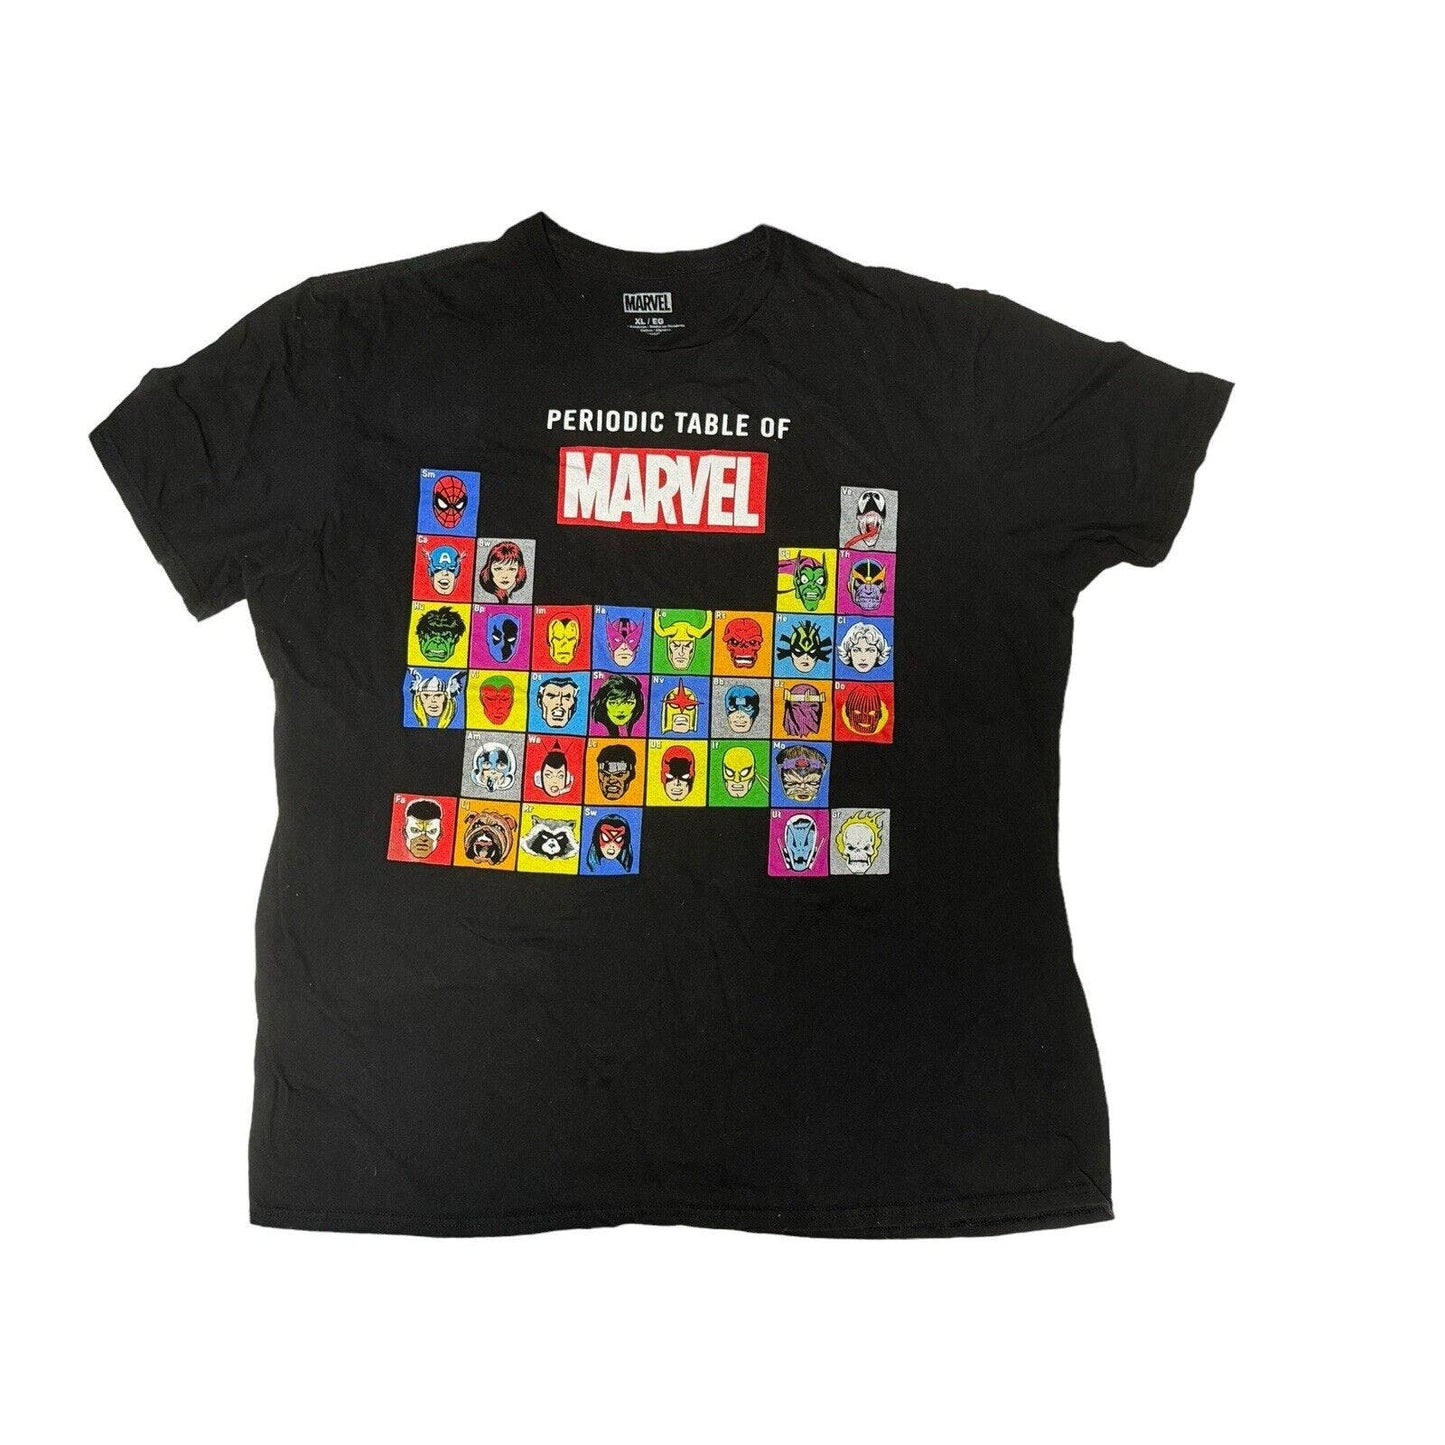 Marvel Mens Size XL Black Short Sleeve Periodic Table of Marvel Graphic T-Shirt